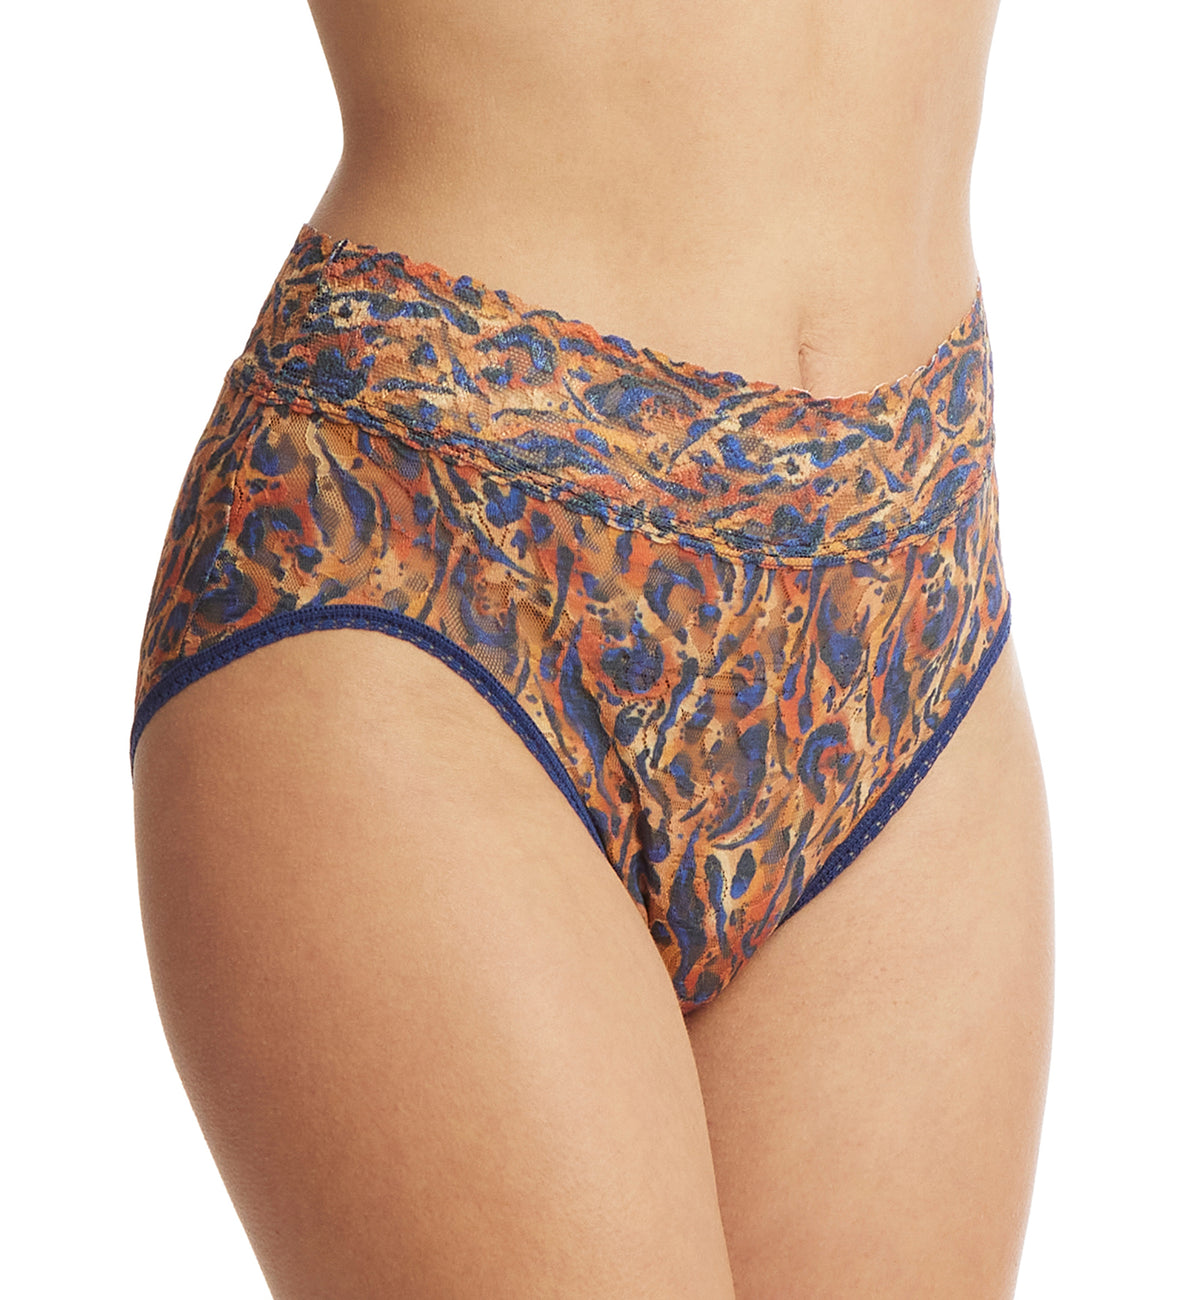 Hanky Panky Signature Lace Printed French Brief (PR461),Small,Wild About Blue - Wild About Blue,Small